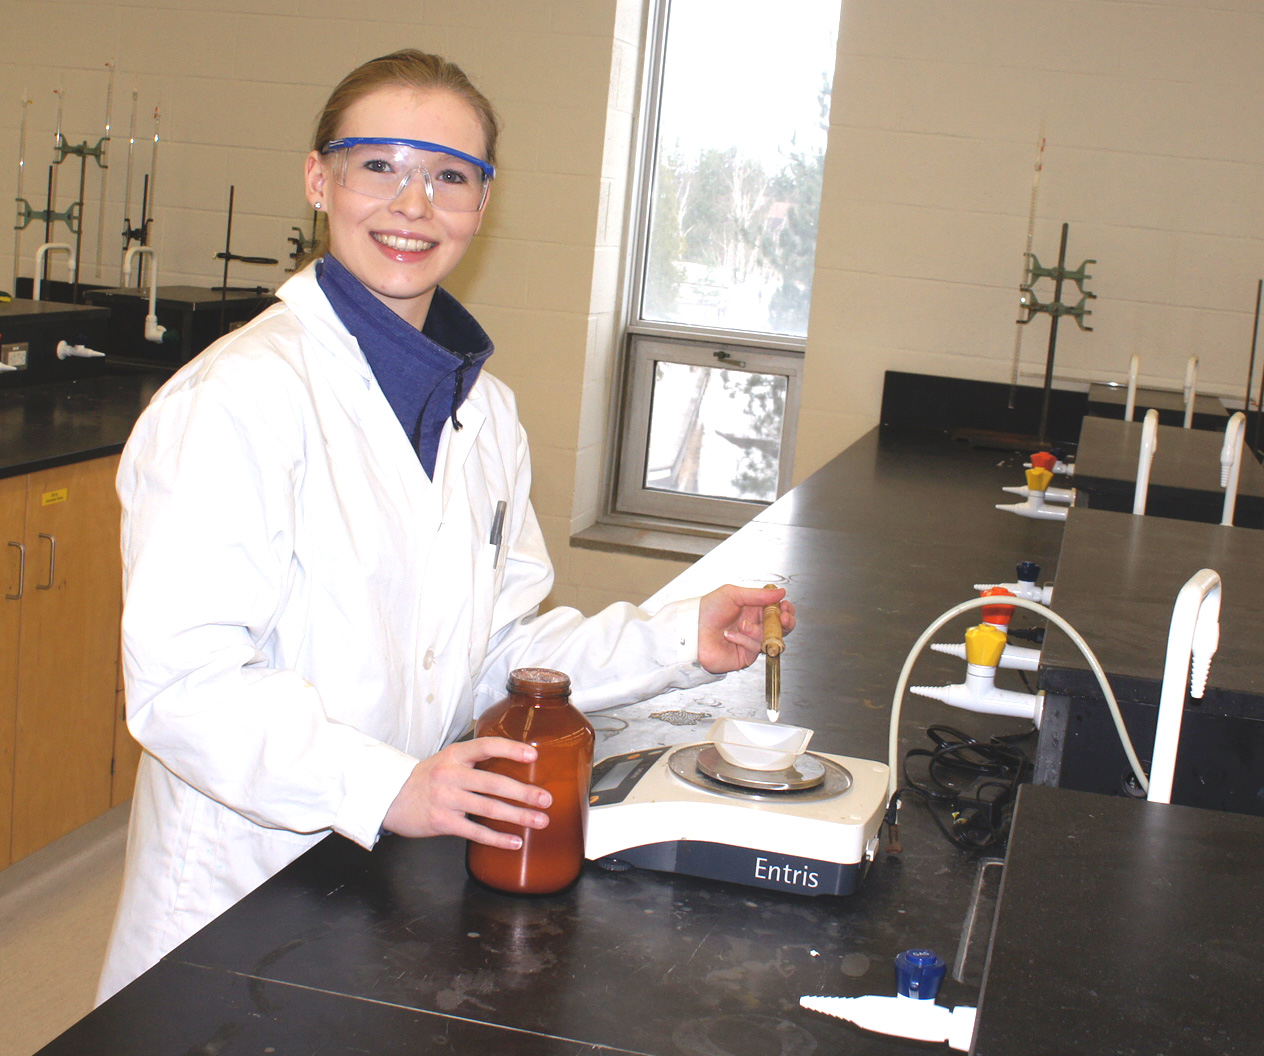 a young female student is measuring a chemical compound while working in a lab